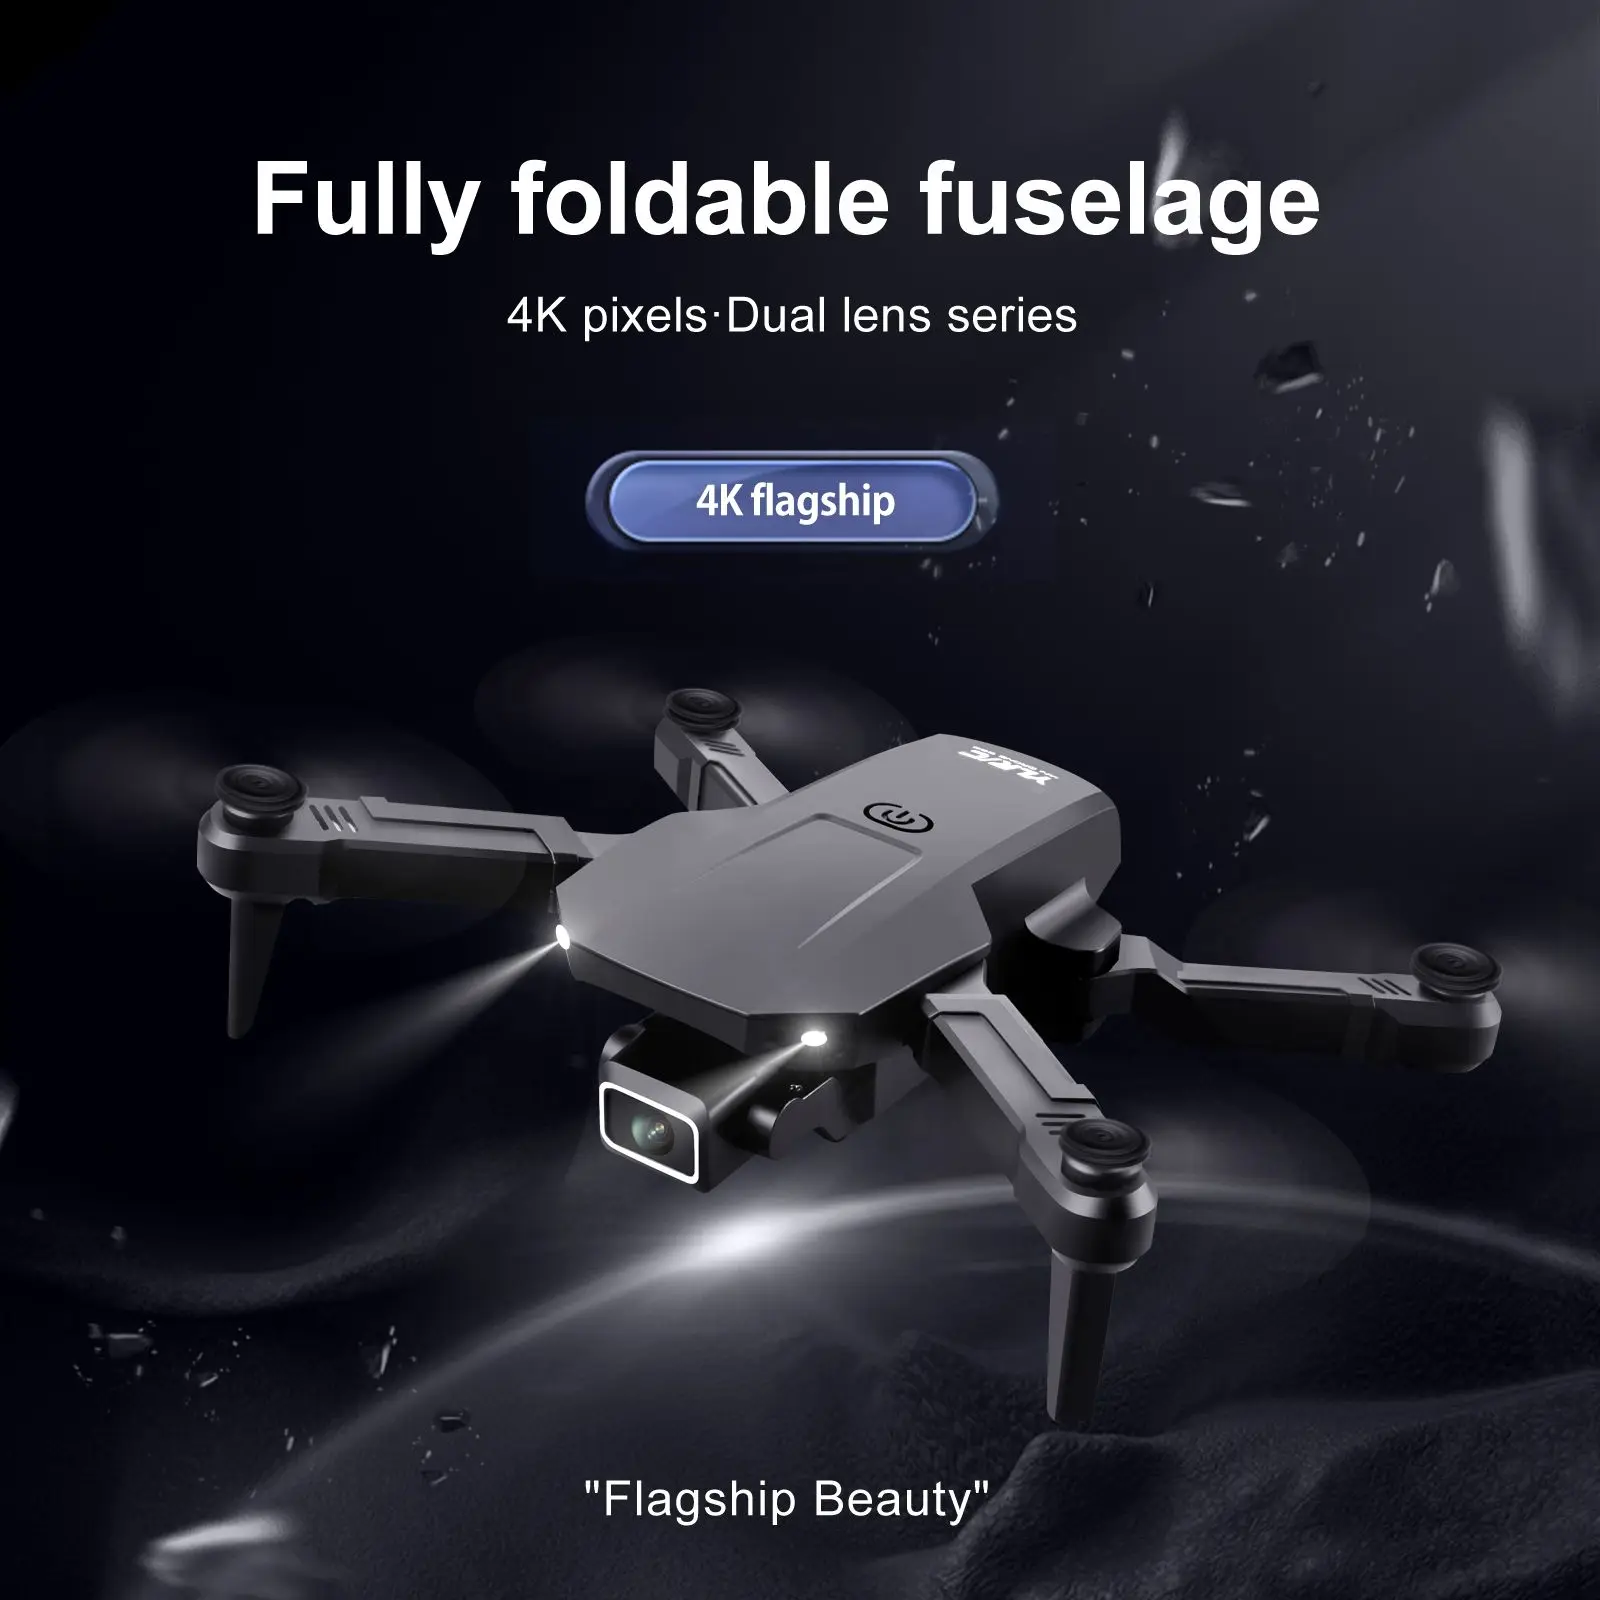 Mini Foldable Drone S68 Pro Mini Drone 4K HD Dual Camera Wide Angle WiFi FPV Drones Quadcopter Height Keep Dron Helicopter Toy 